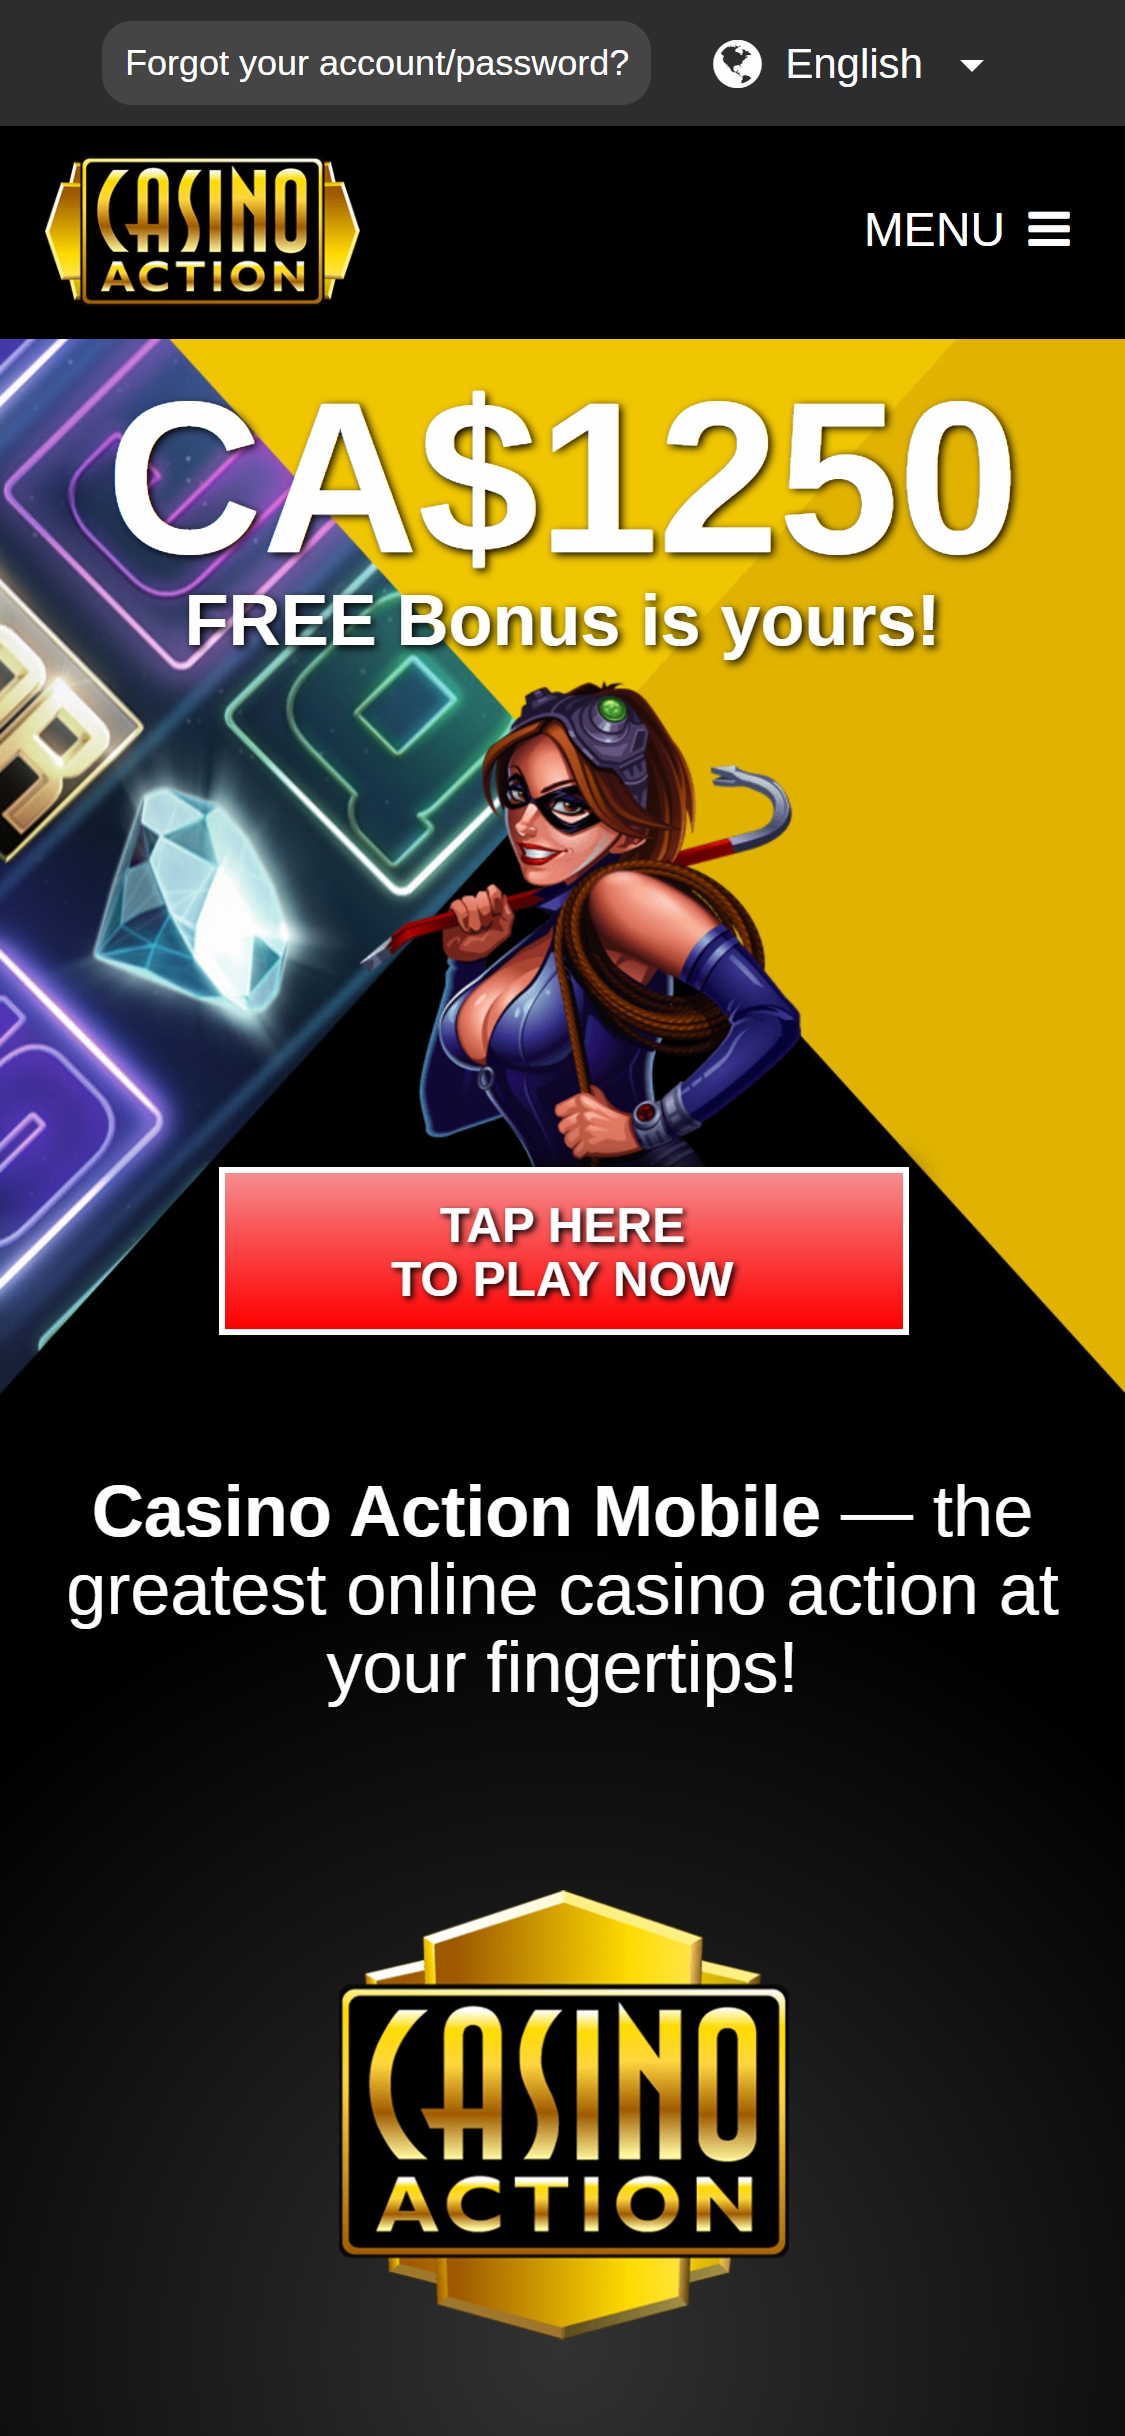 Casino Action Mobile Review